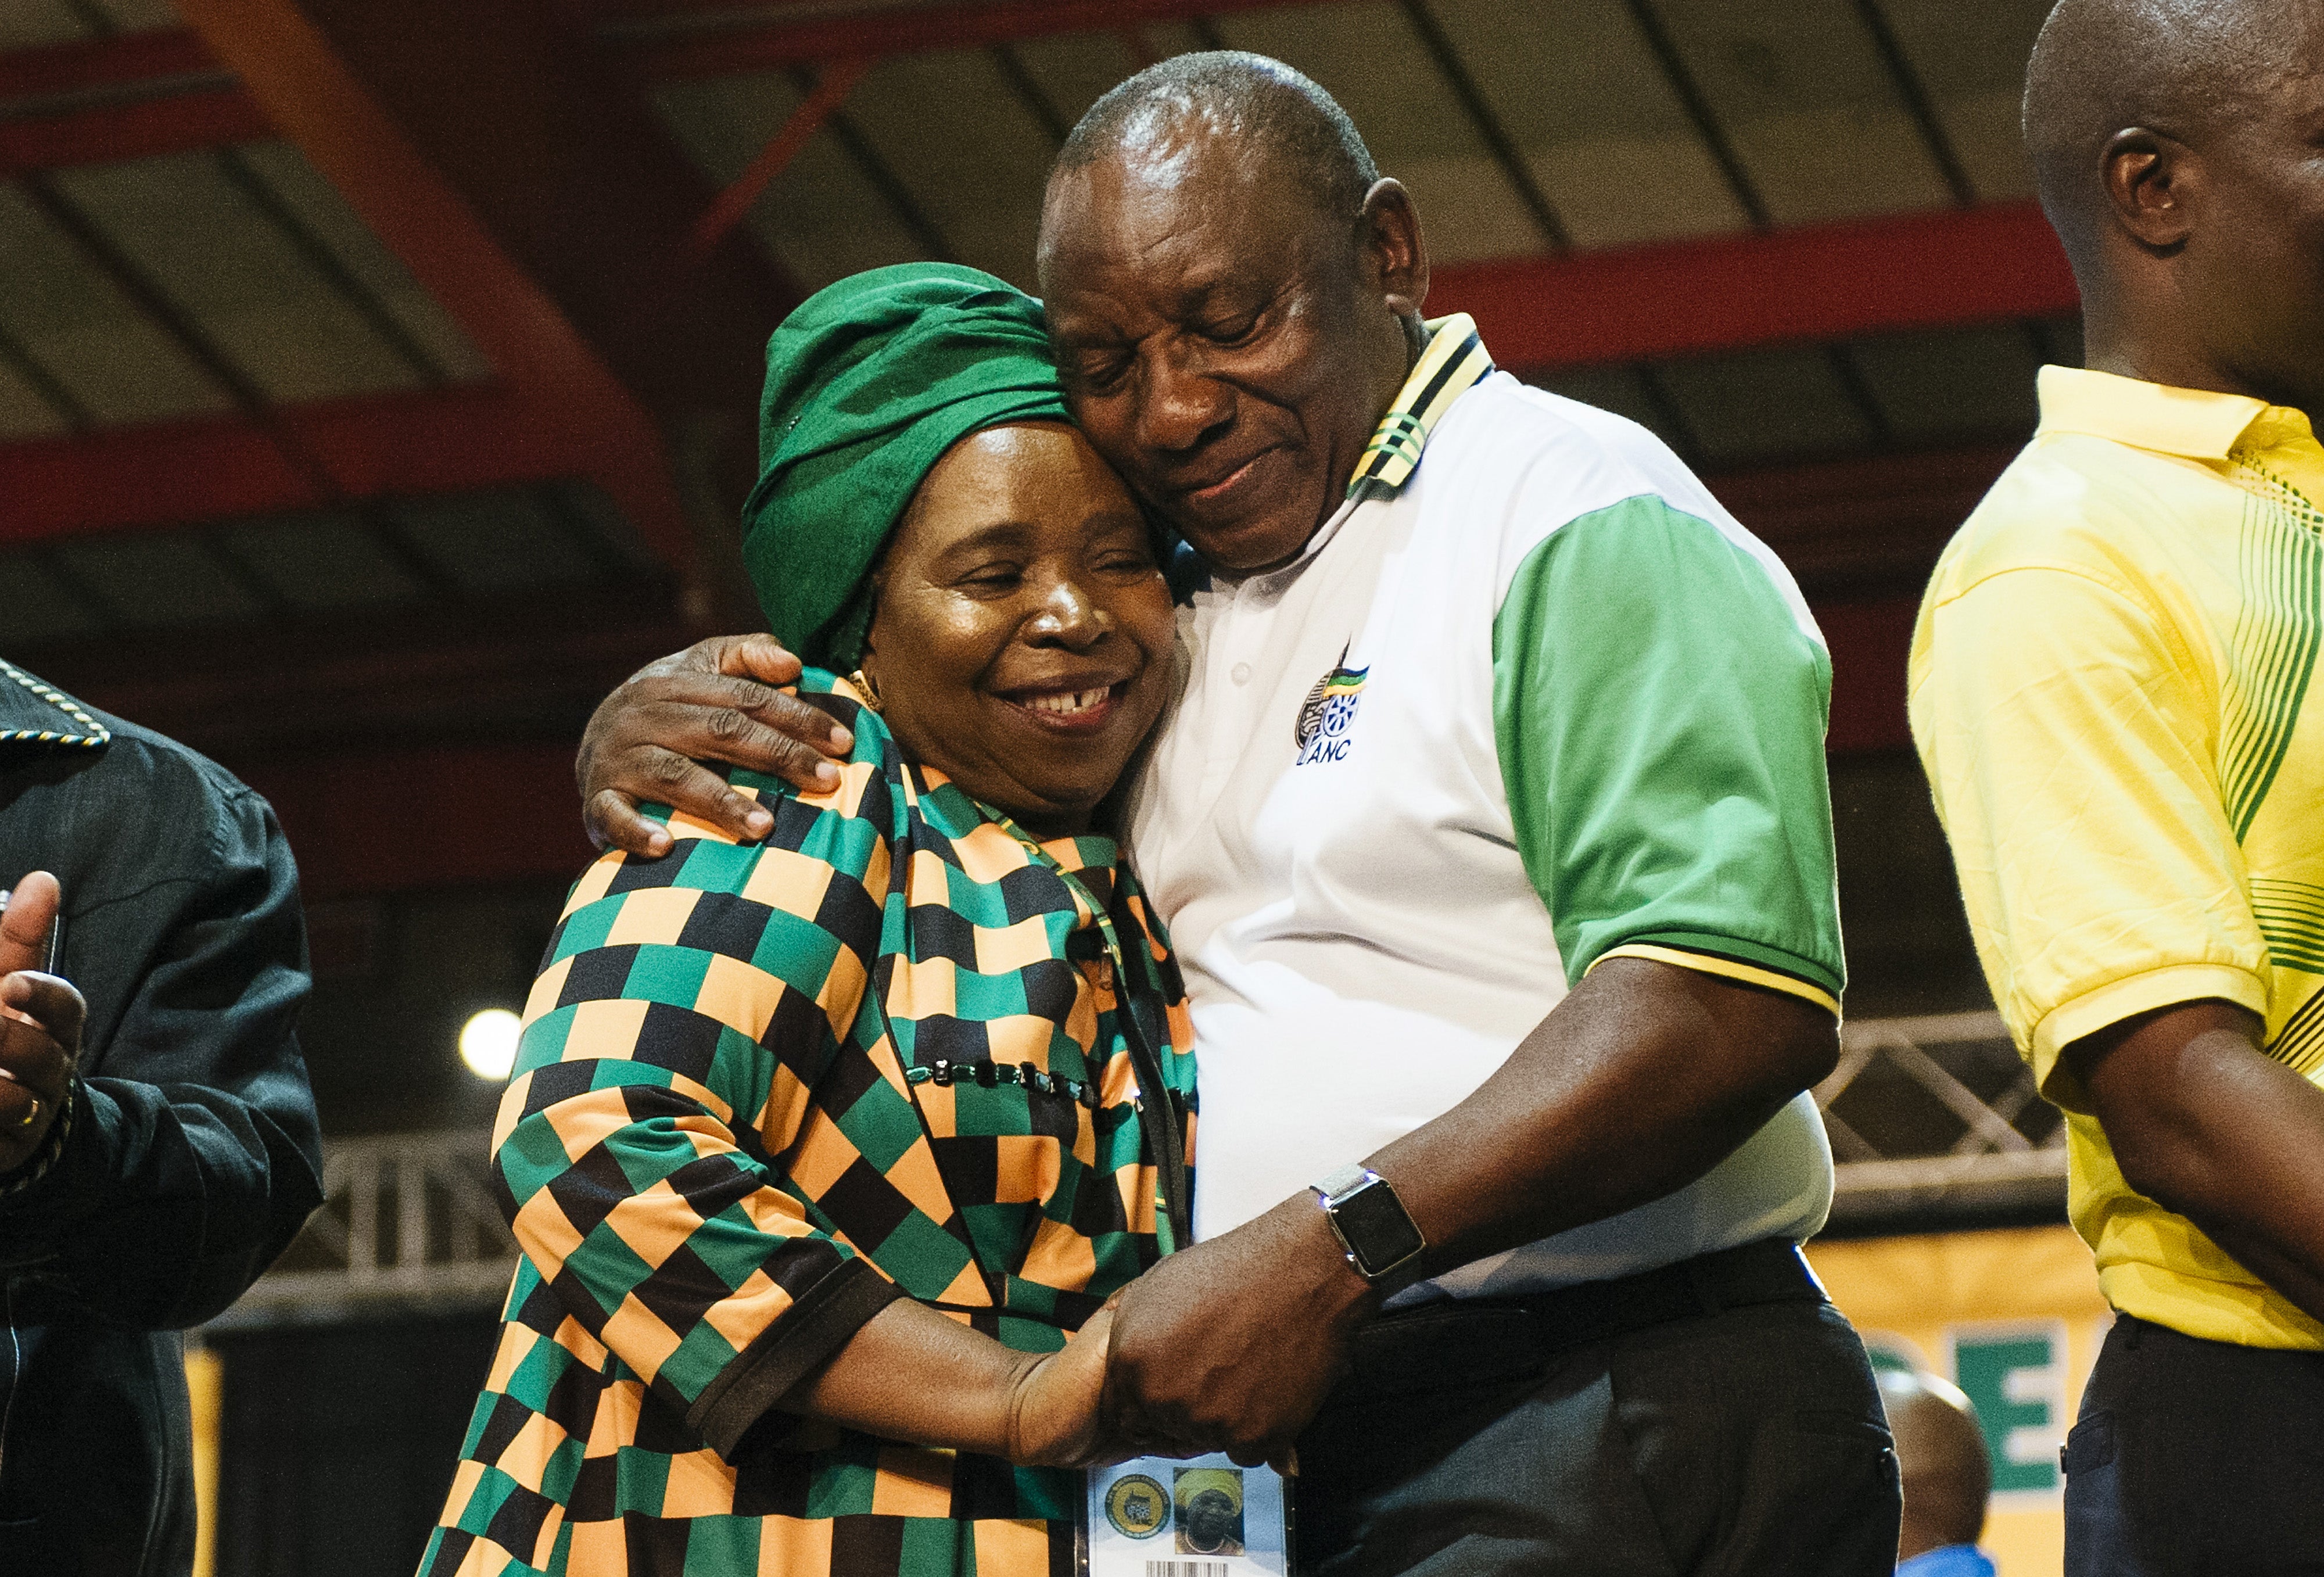 Cyril Ramaphosa Chosen To Lead South Africa's Ruling Party